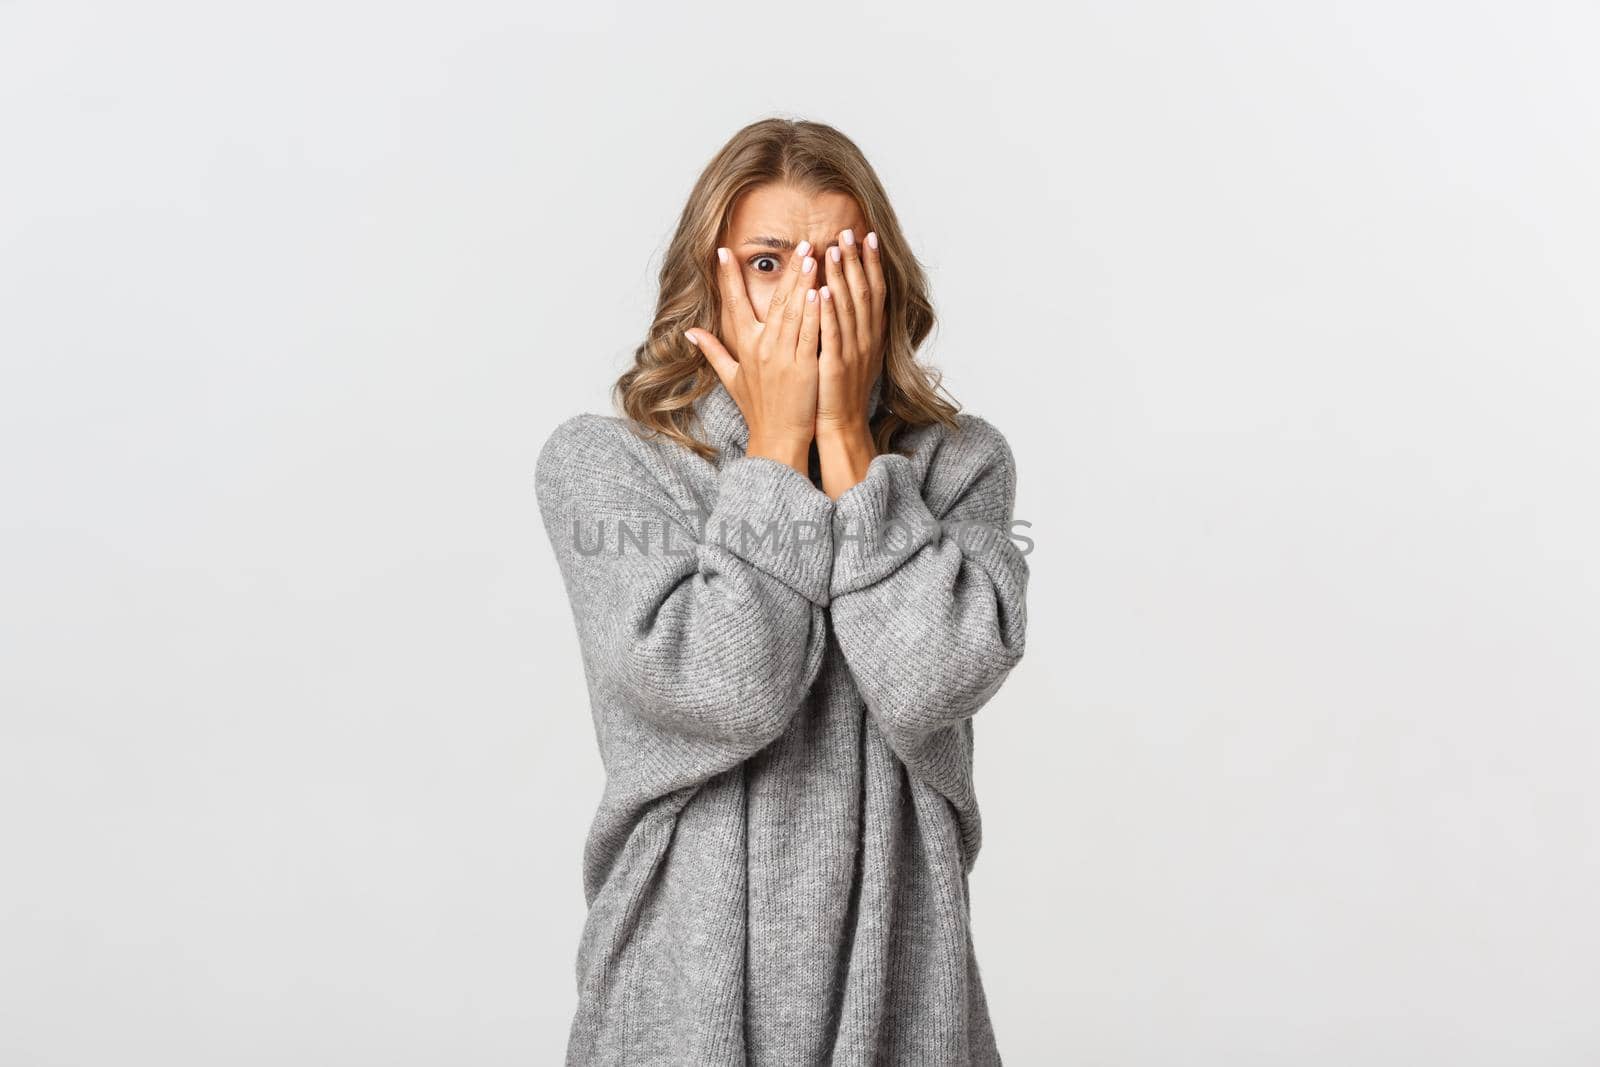 Image of scared woman in grey sweater, shut her eyes but peeking through fingers at something scary, standing horrified over white background.